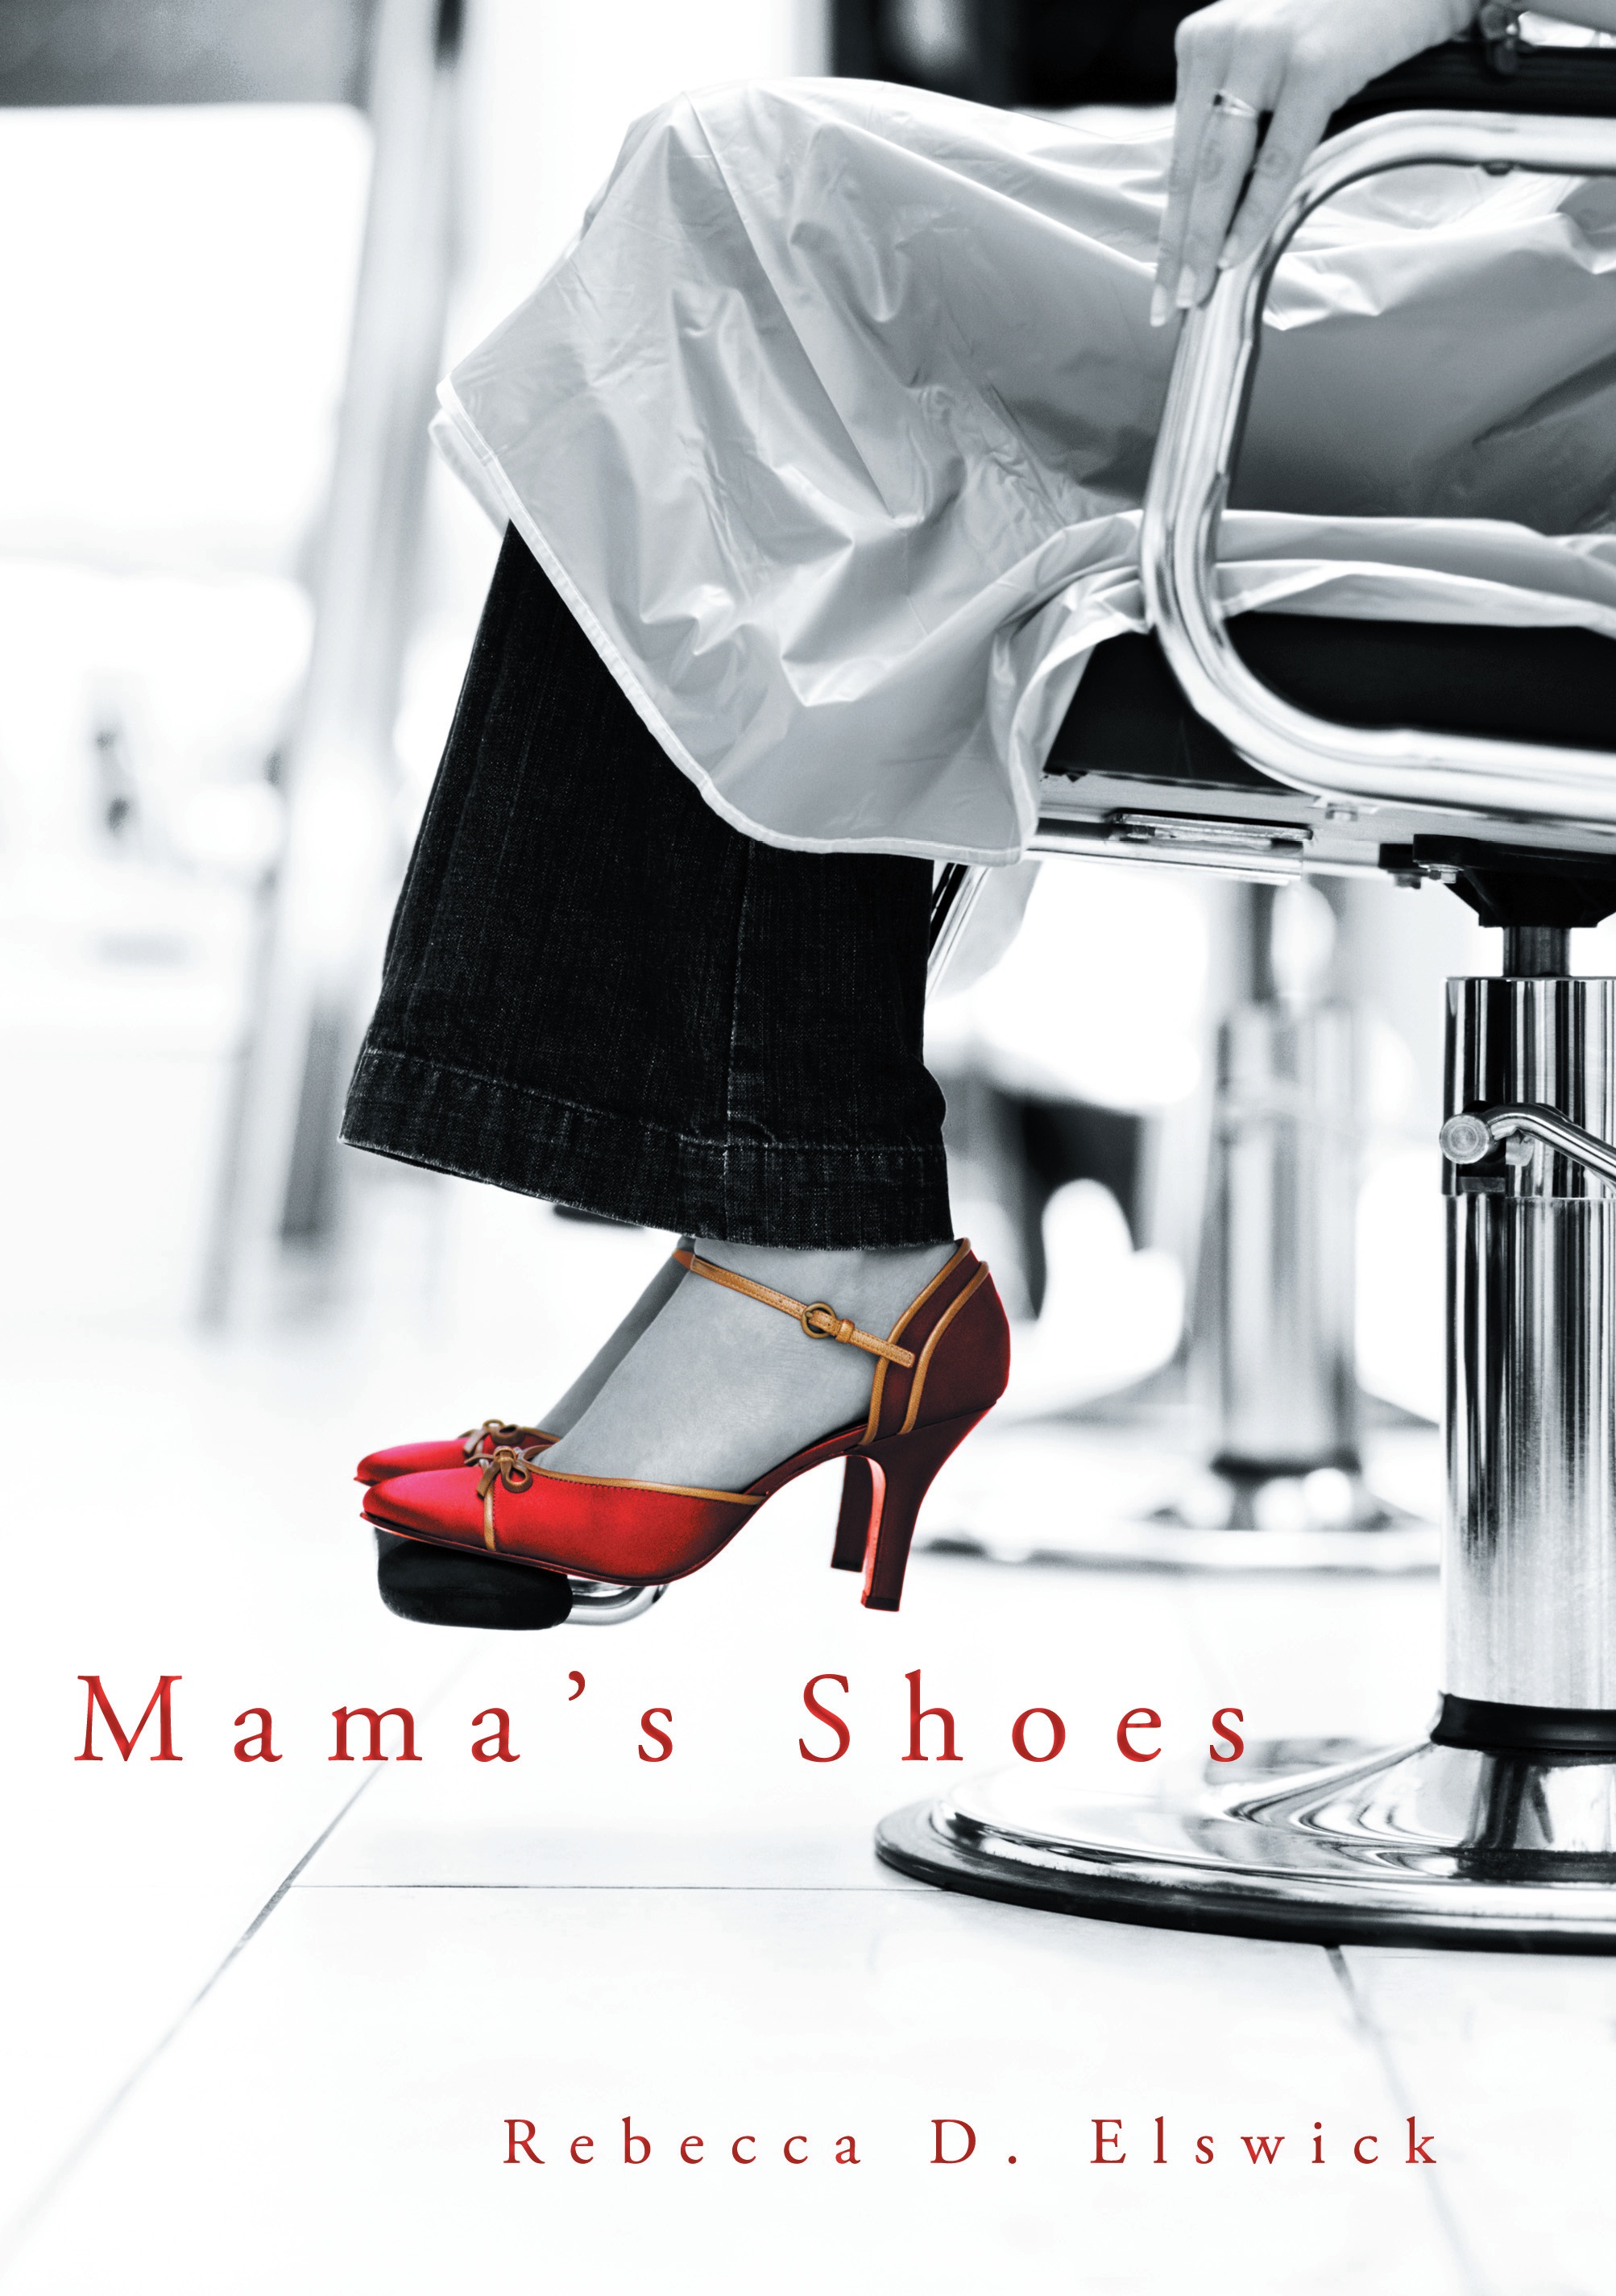 Mama's Shoes